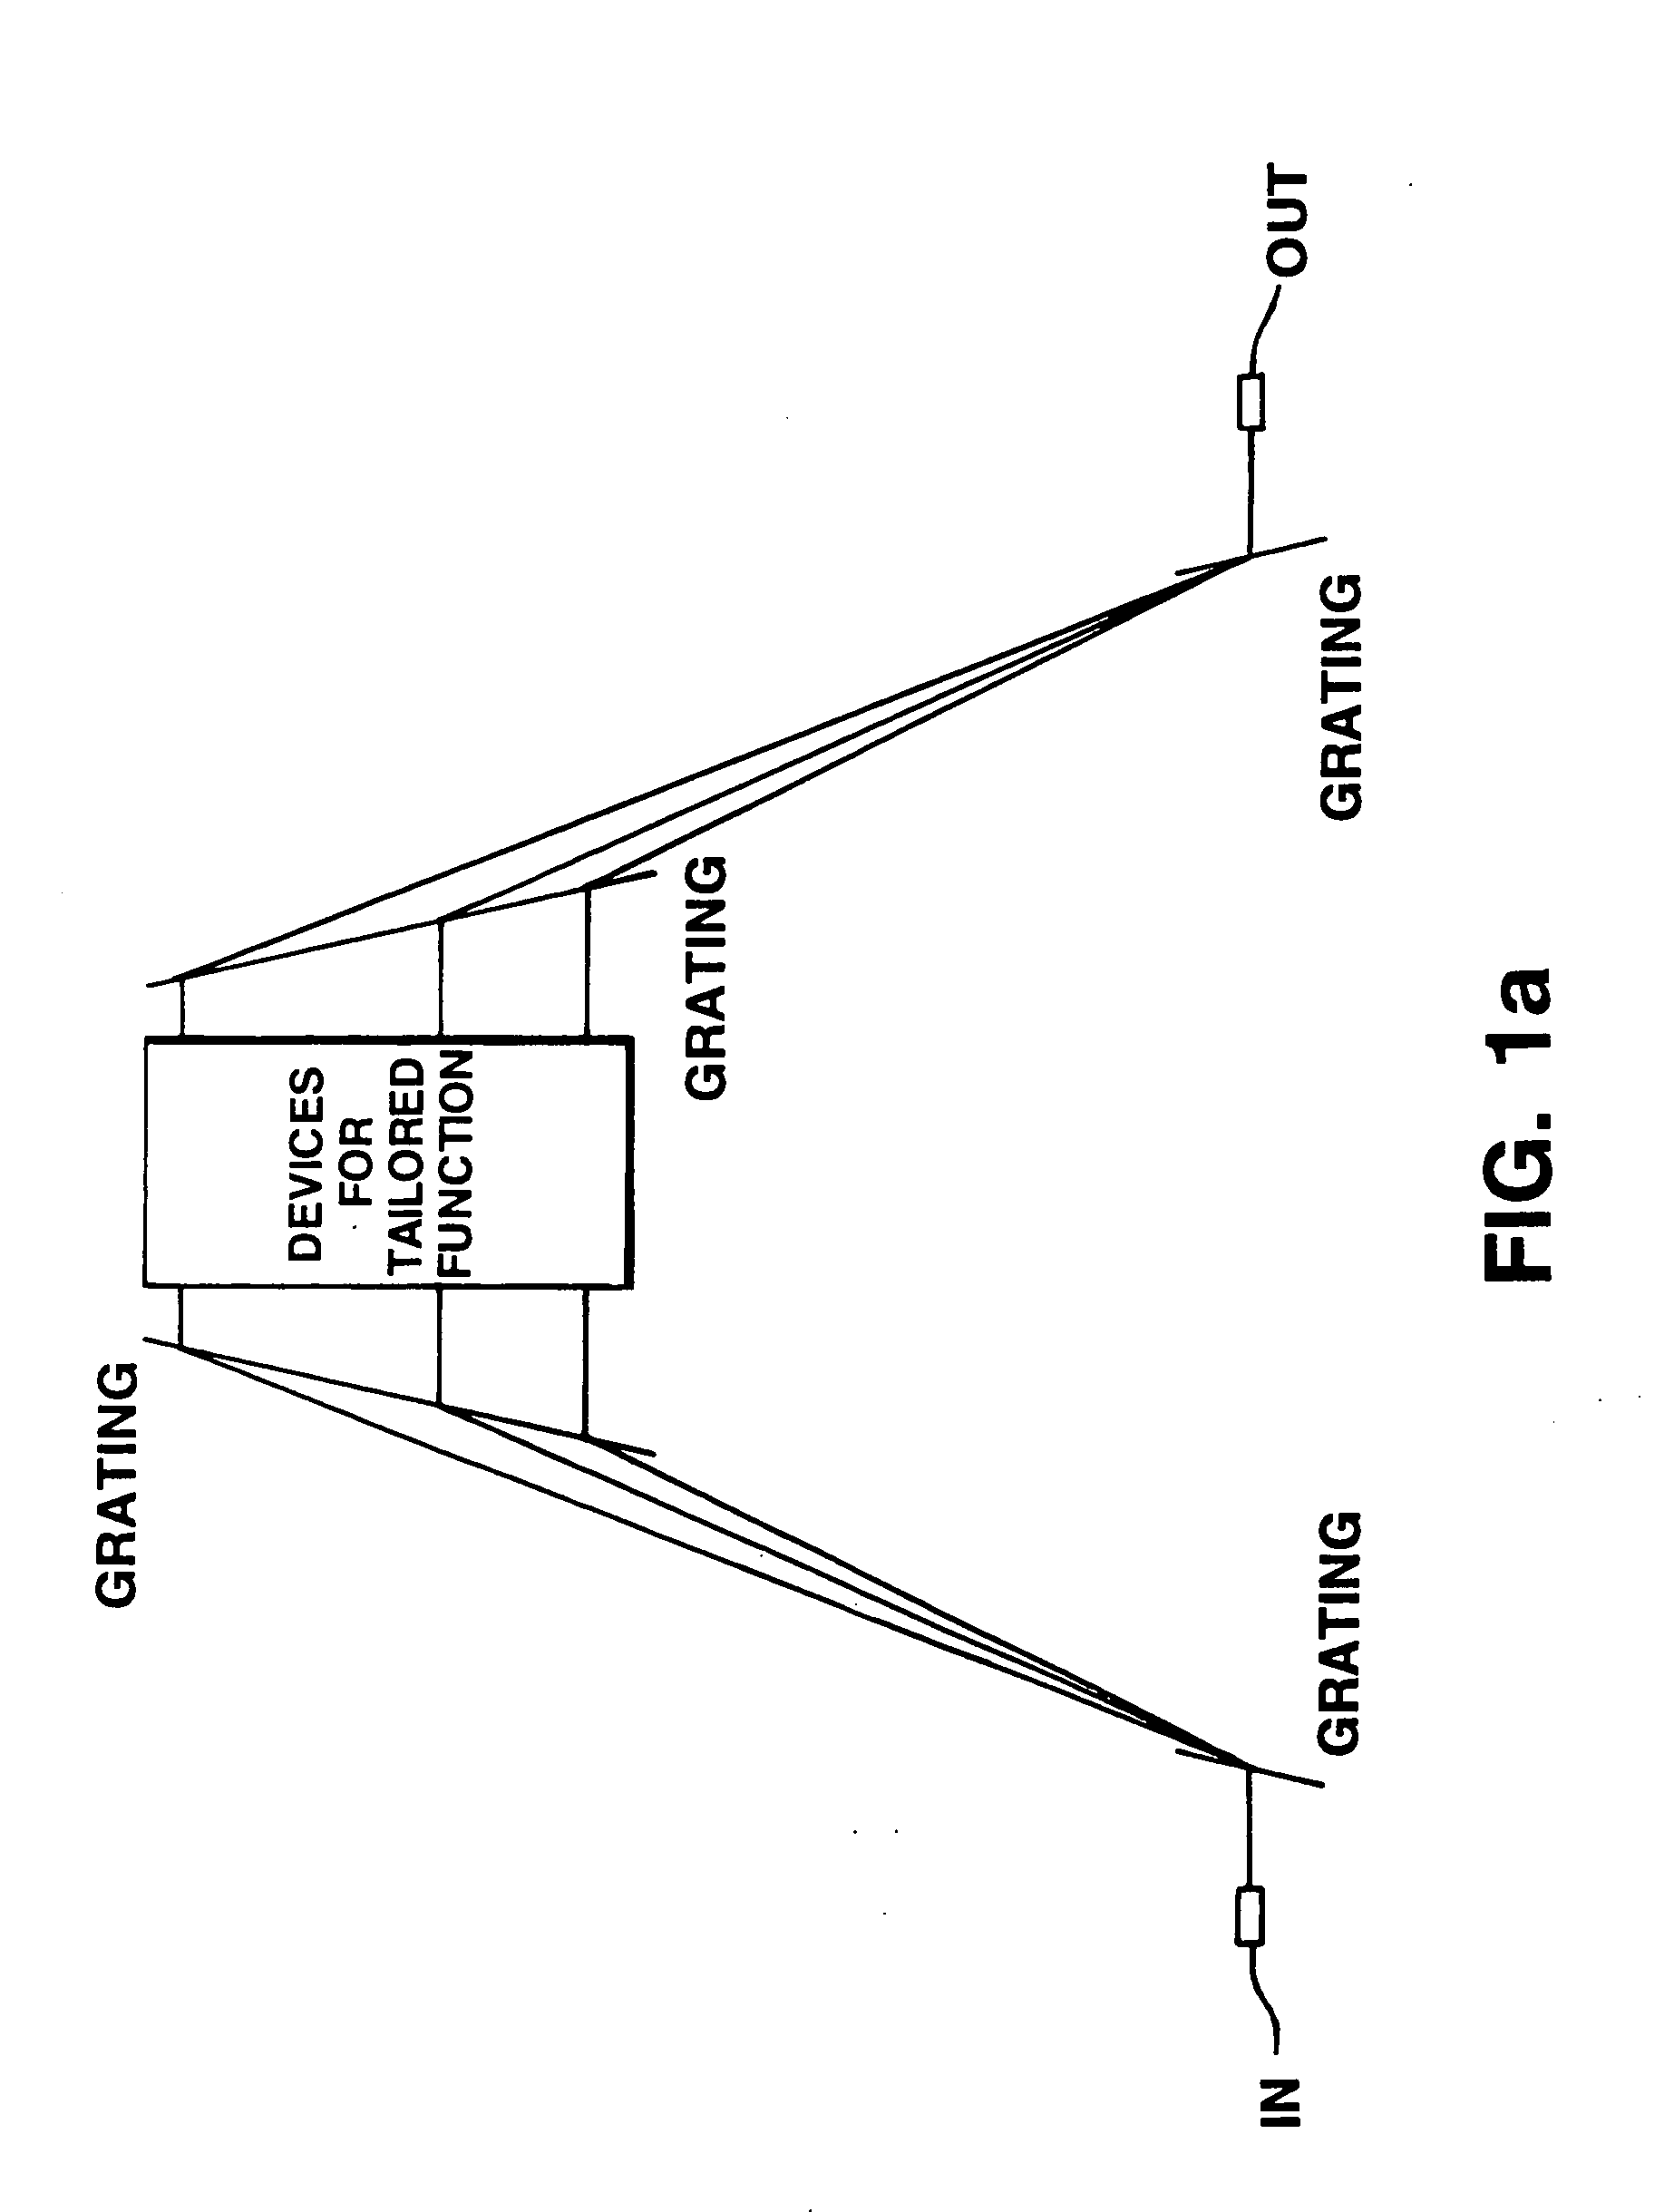 Compact wavelength selective switching and/or routing system